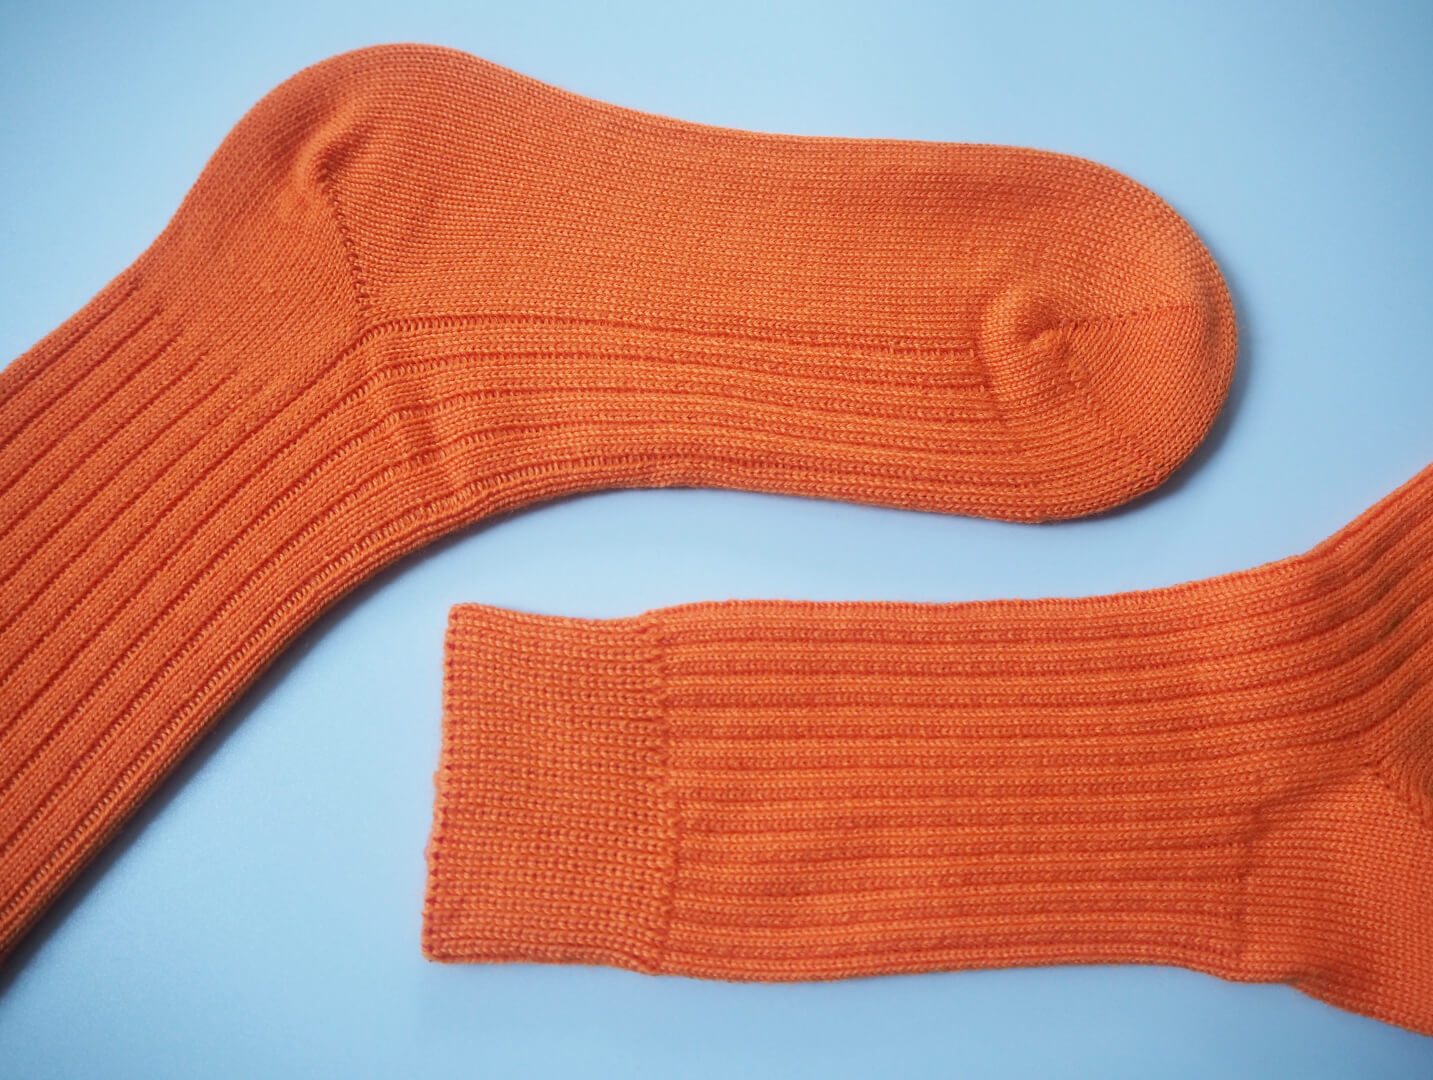 A pair of socks by K.Moods. Knitted with bright orange yarn, a thick cuff, and repetitive ribbing around the leg and on the top of the foot. This picture shows the socks lying flat with a focus on the foot and the leg.